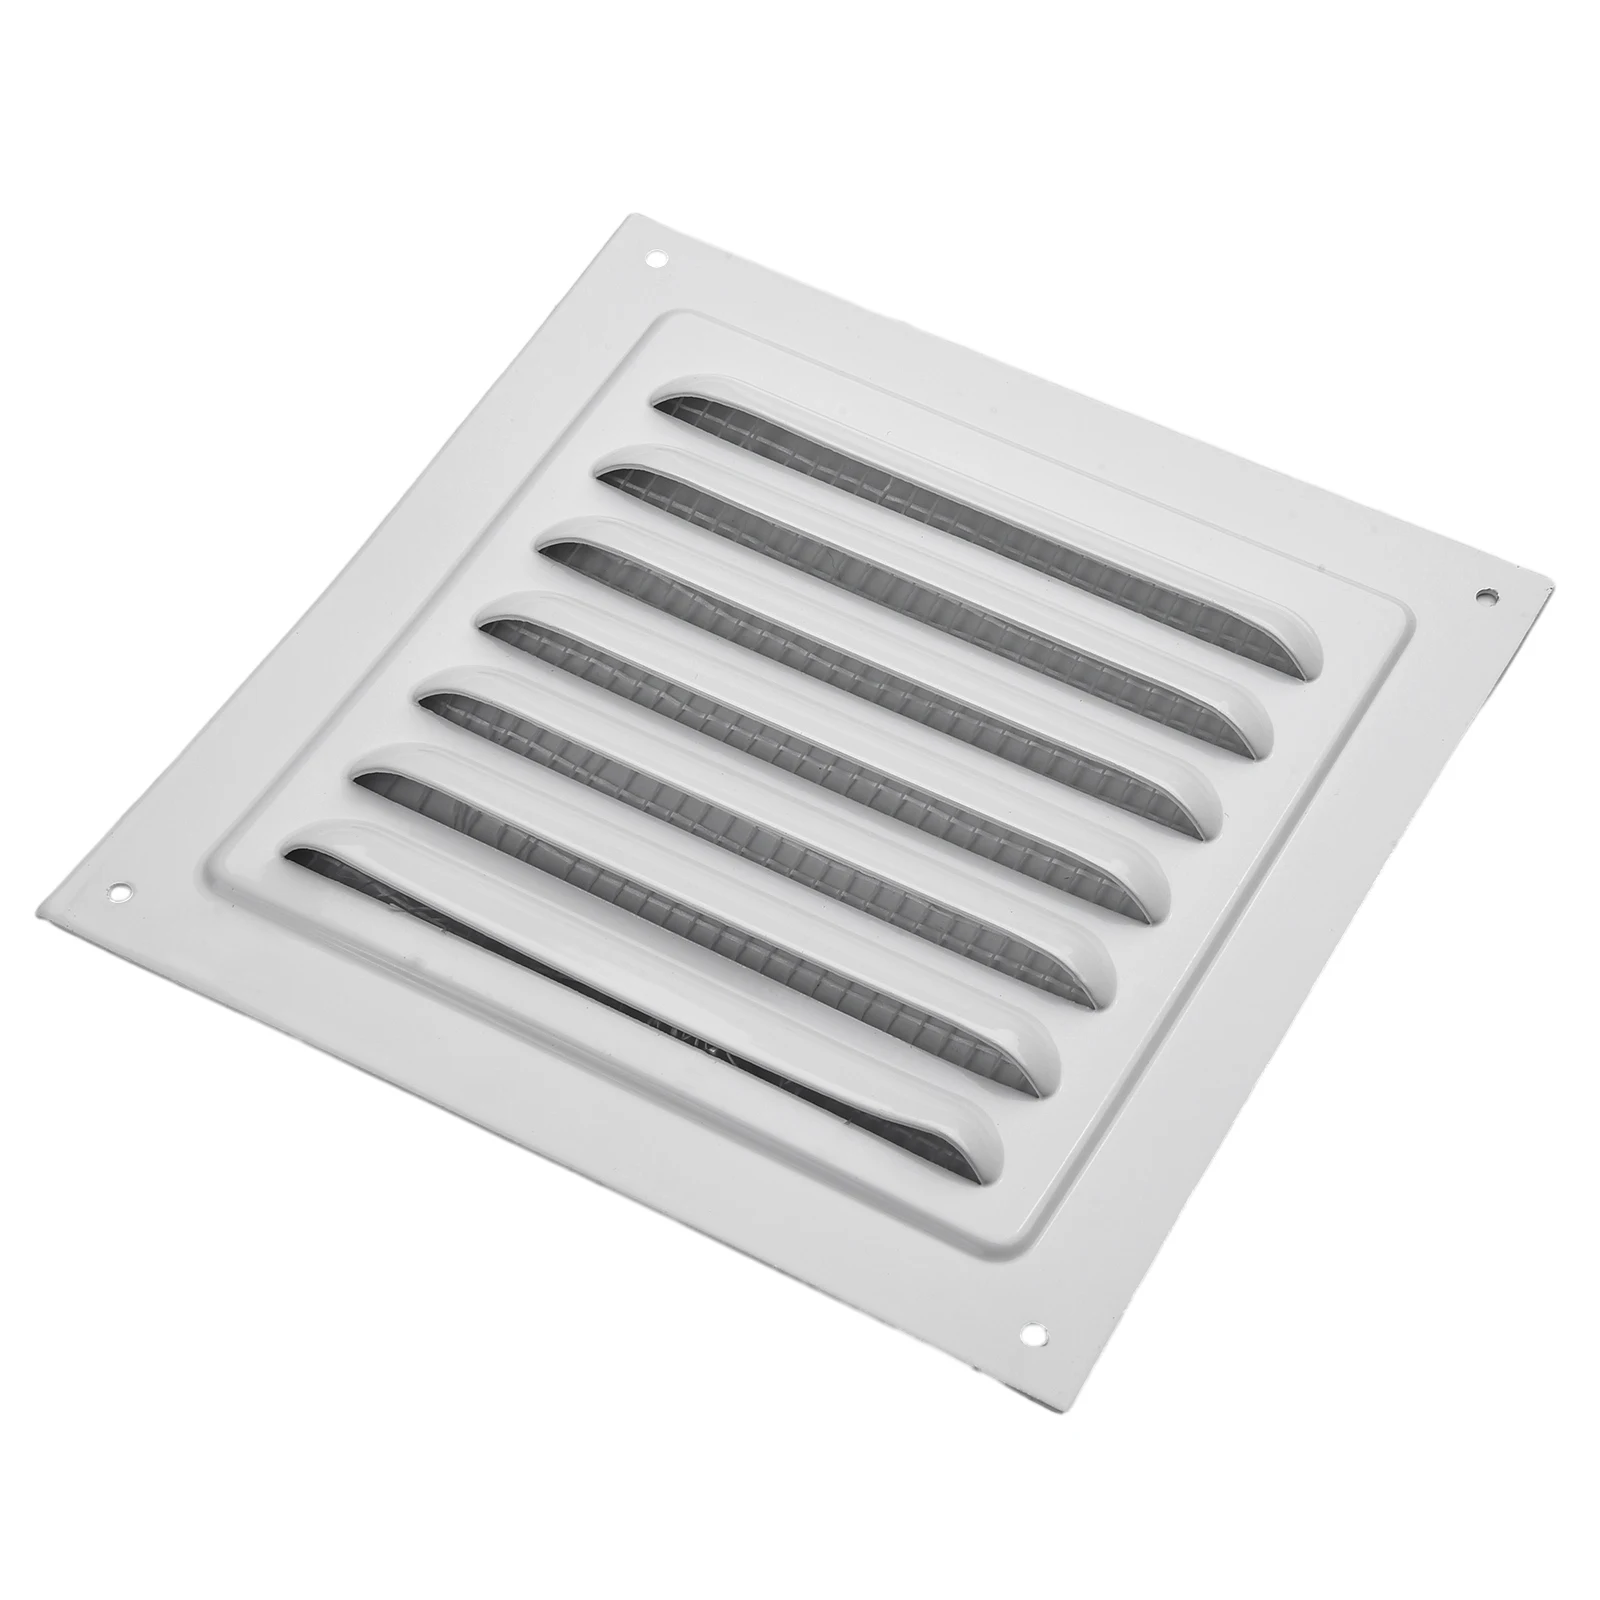 

Aluminum Alloy Air Ventilation Cover Louver Ducting Ceiling Ventilation Grill Cover Heating Cooling Ventilator Mesh Vent Grille